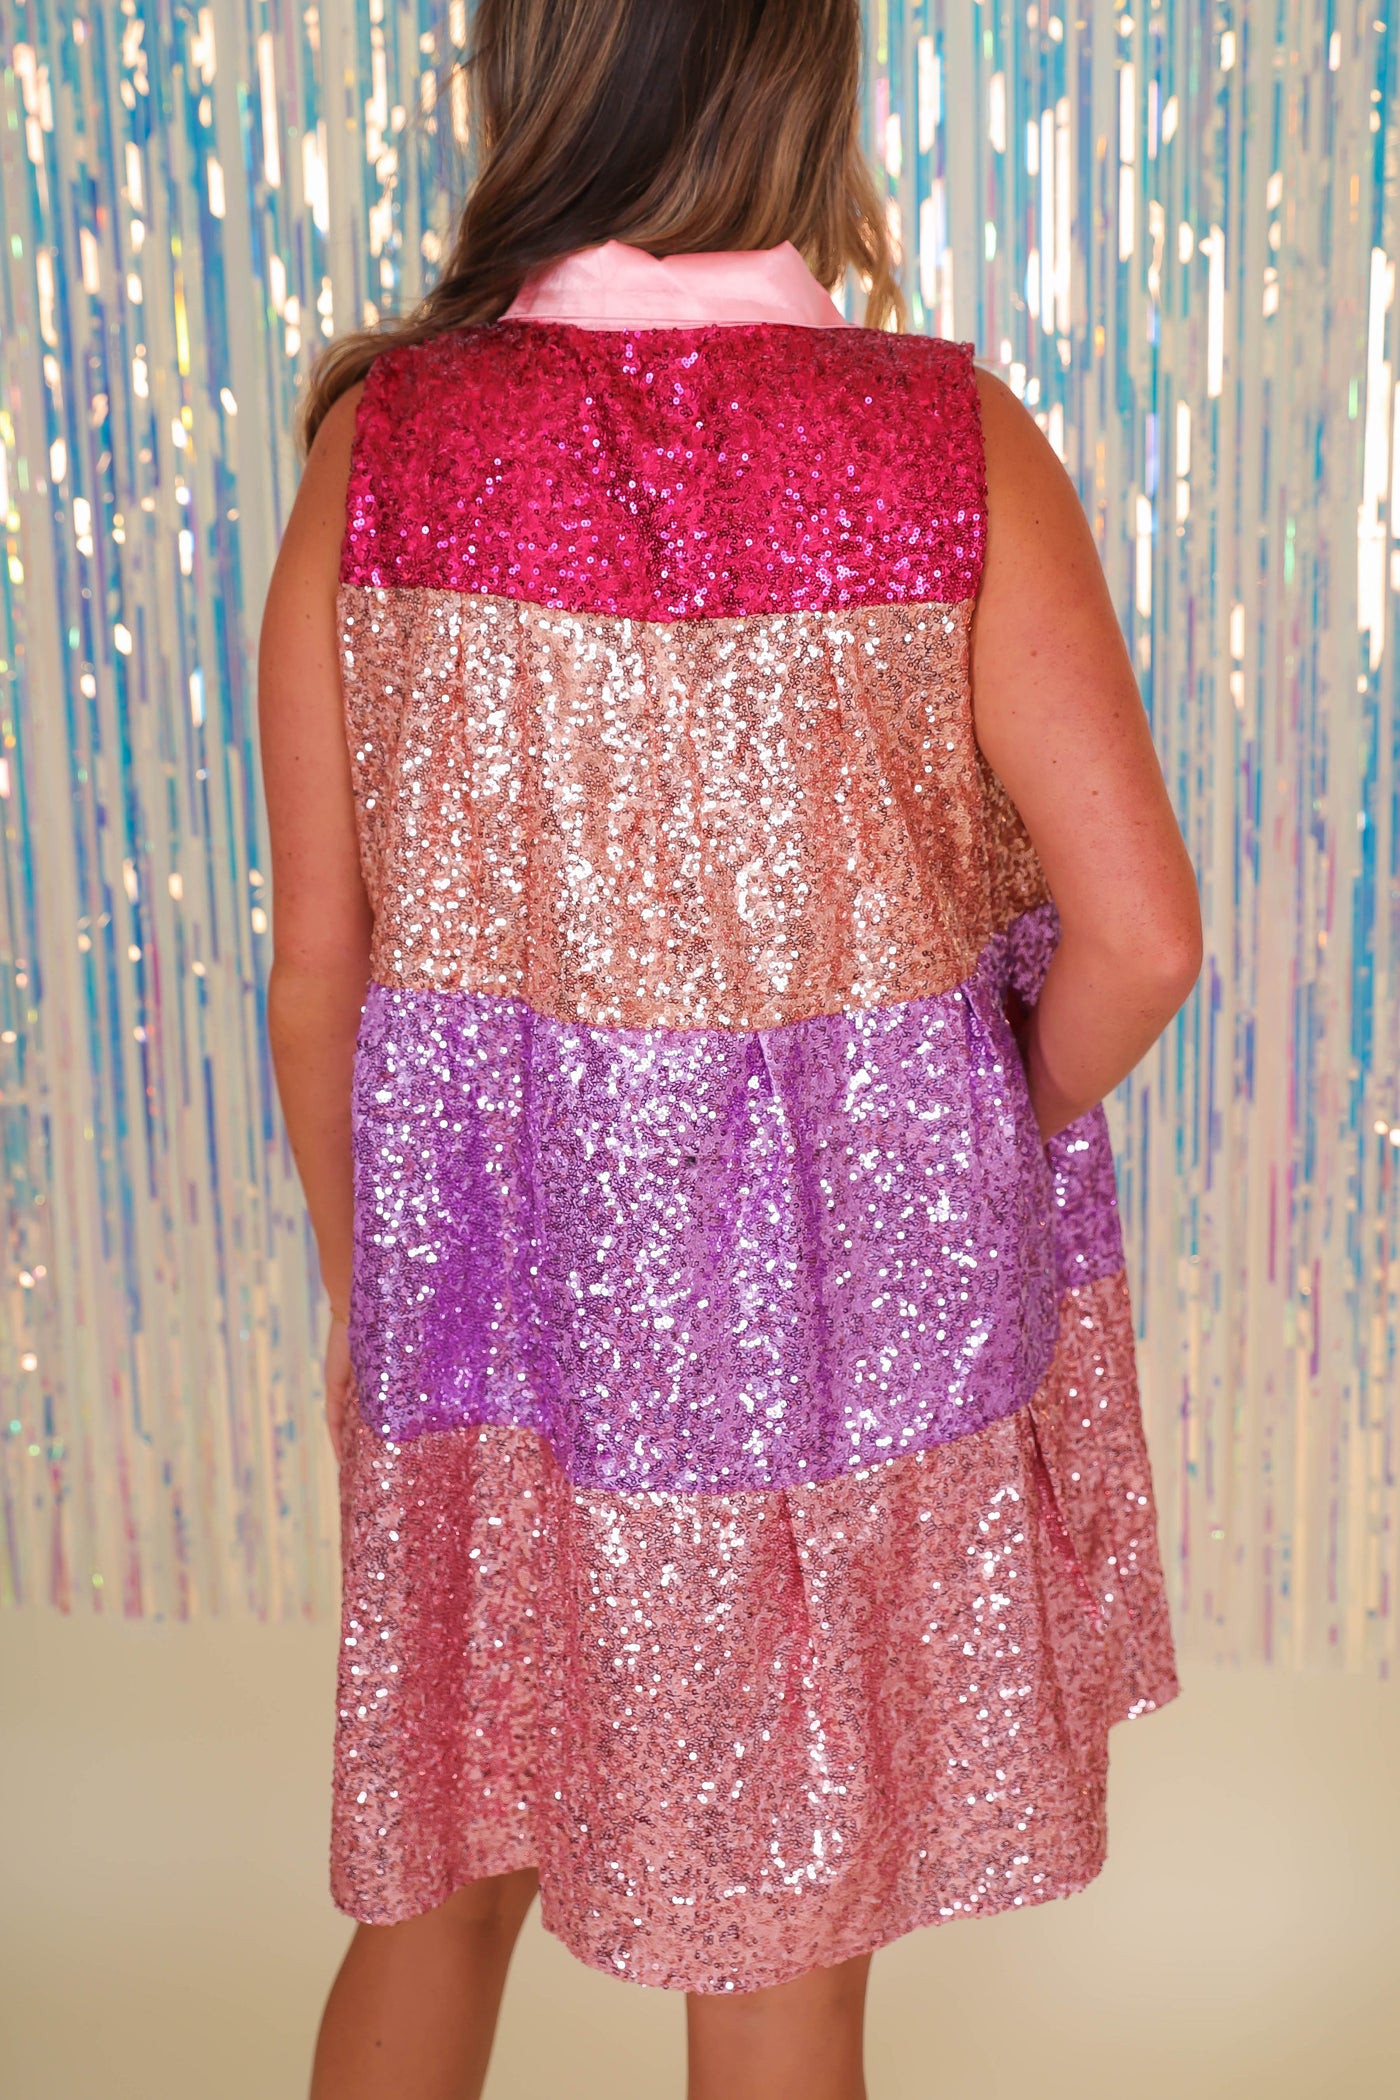 Sparkles Sequin Colorful Dress- Queen of Sequins Striped Dress- All Sequin Striped Dress